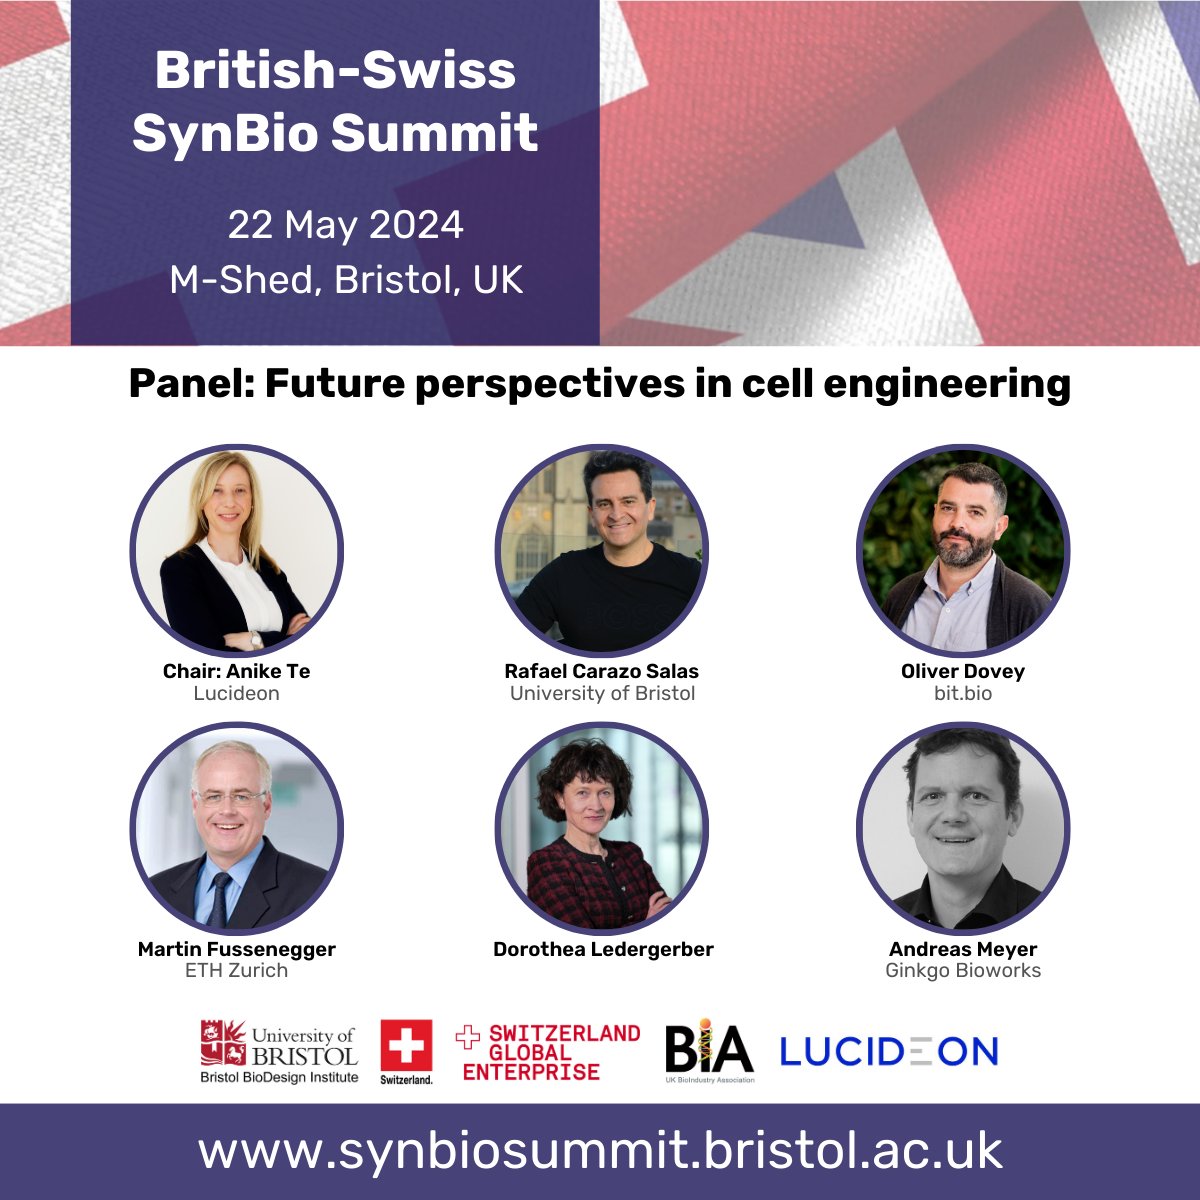 📣 Hear from Anike Te, Lucideon, @RafaCarazoSalas @cellvoyant, @ODovey @bitbio, Dorothea Ledergerber, Martin Fussenegger @ETH_en and @Andy_FGen @Ginkgo about future perspectives in cell engineering at #SynBio Summit 2024 in Bristol. Register now 👉 ow.ly/q42J50Rb7zI